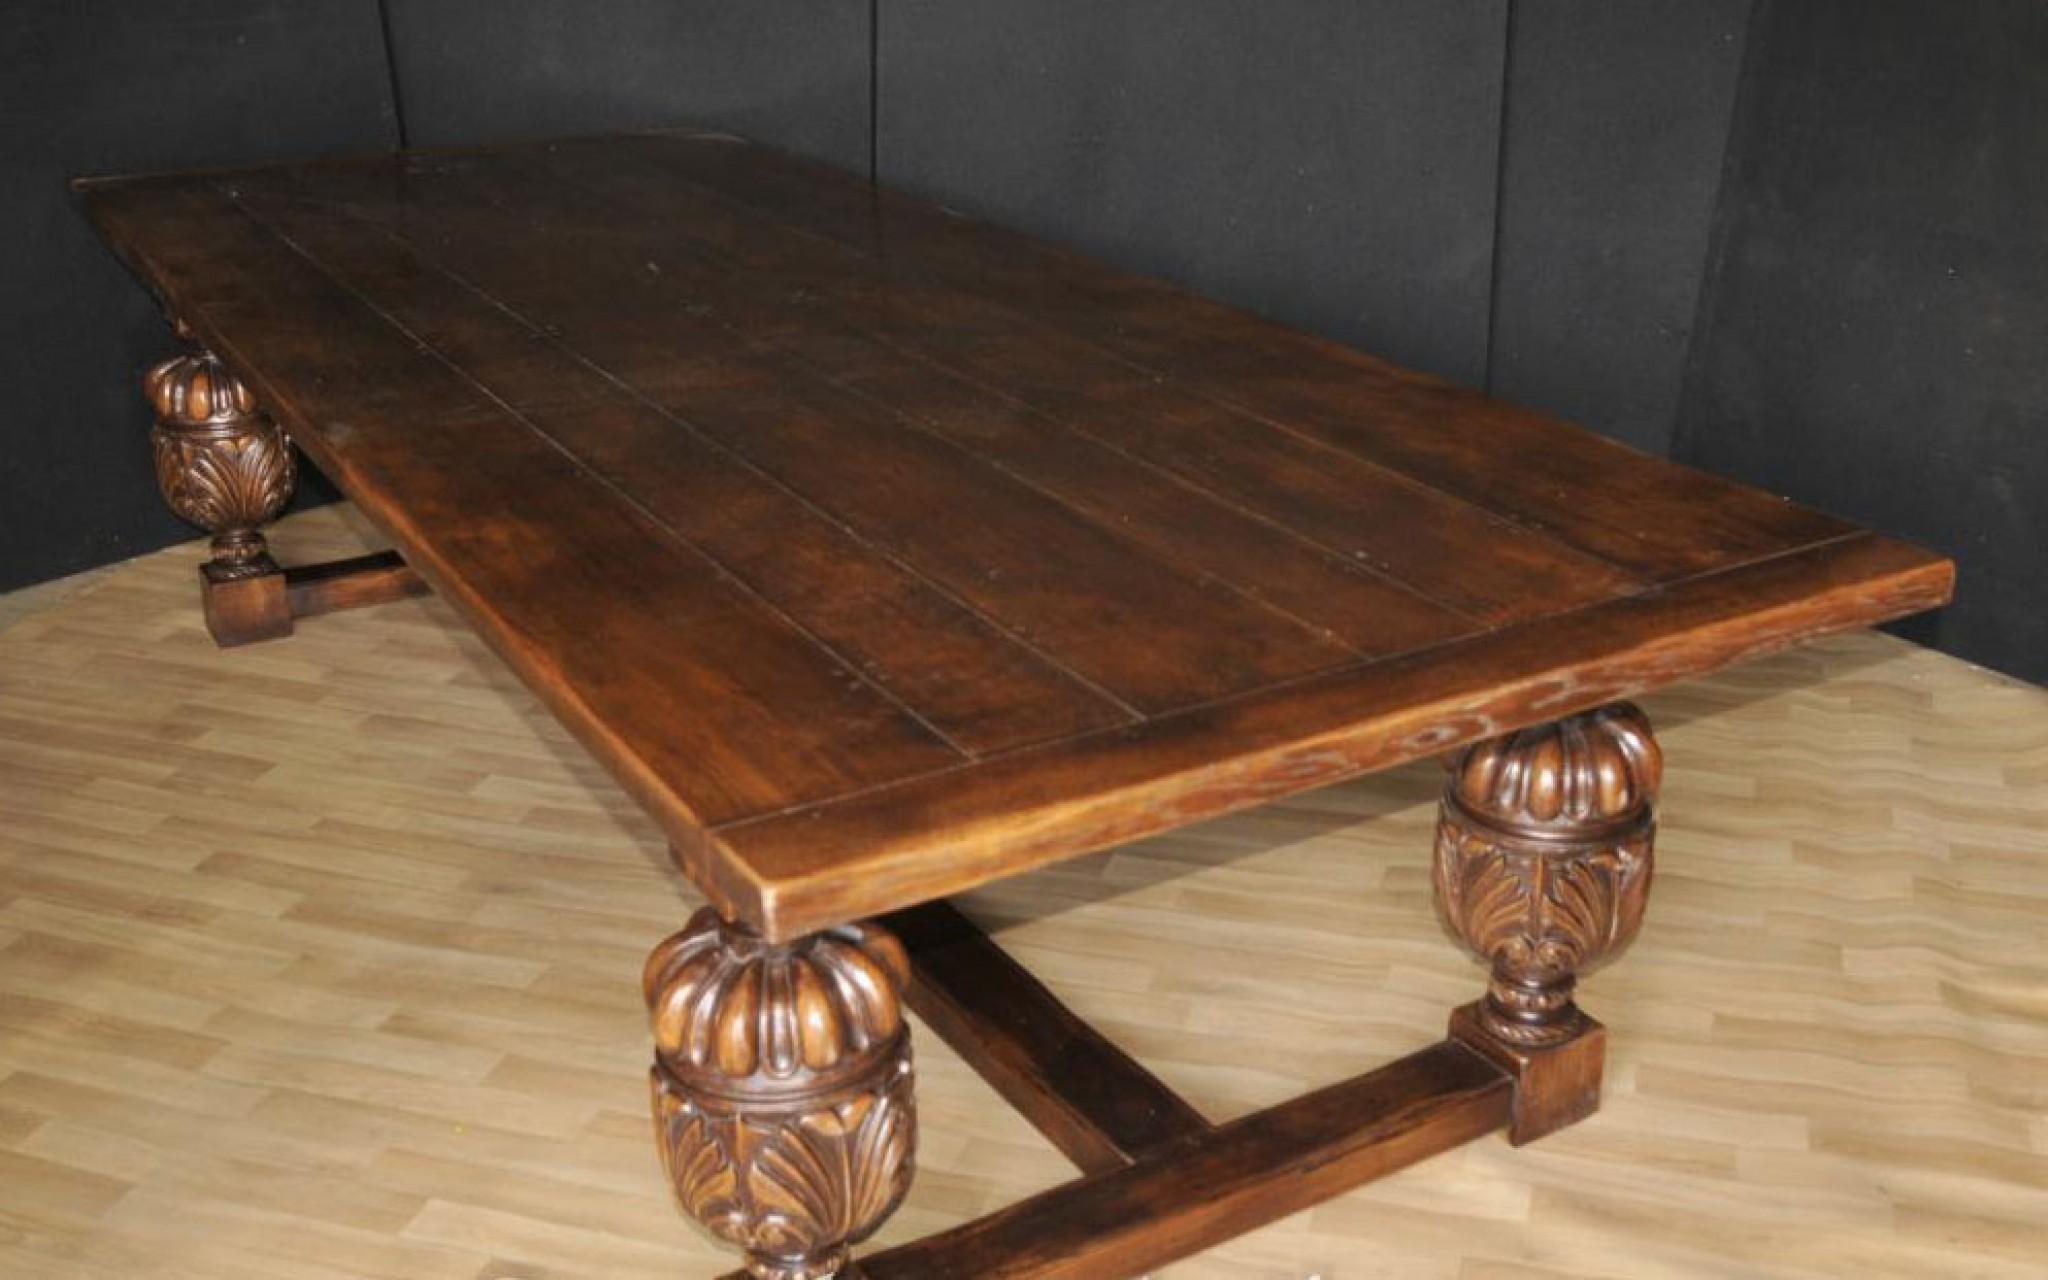 Large Refectory Table - French Farmhouse Oak Kitchen Dining Tables For Sale 1